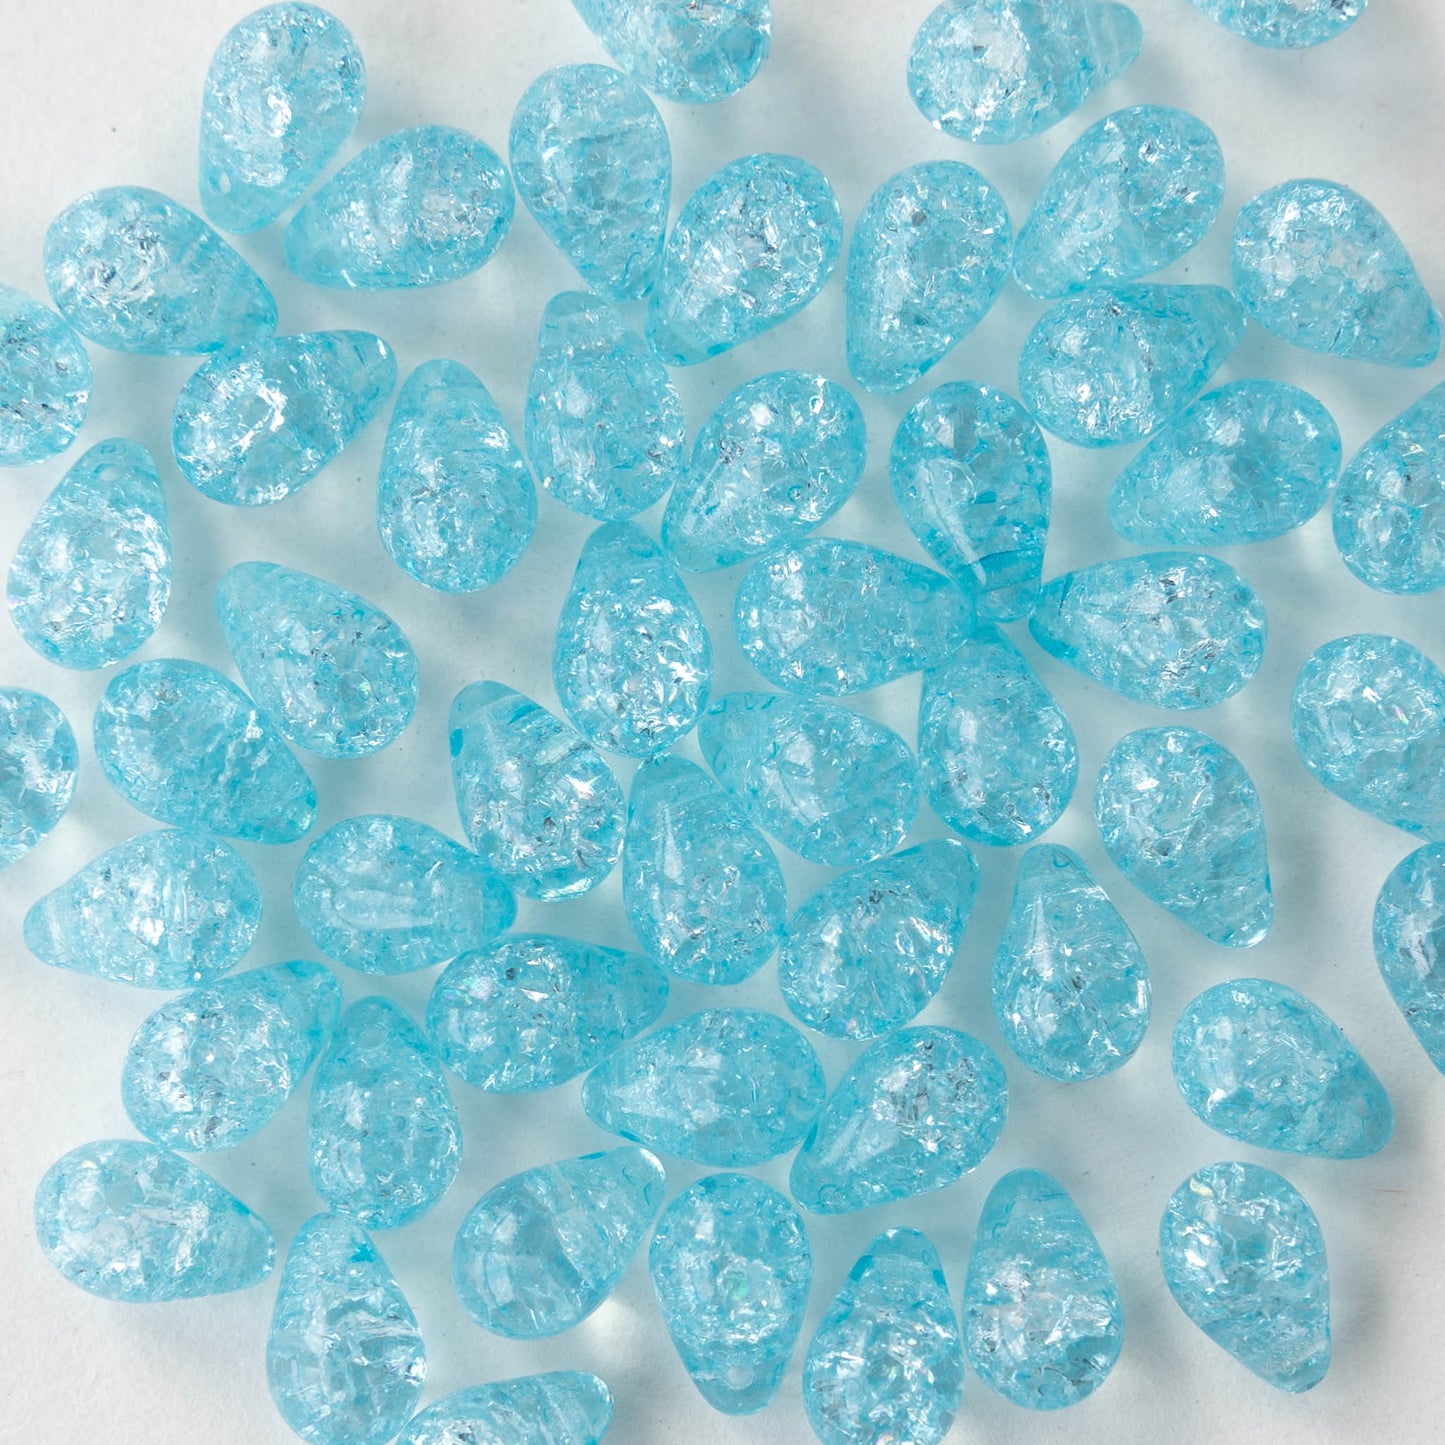 Load image into Gallery viewer, 6x9mm Glass Teardrop Beads - Lt. Aqua Crackle - 50 Beads
